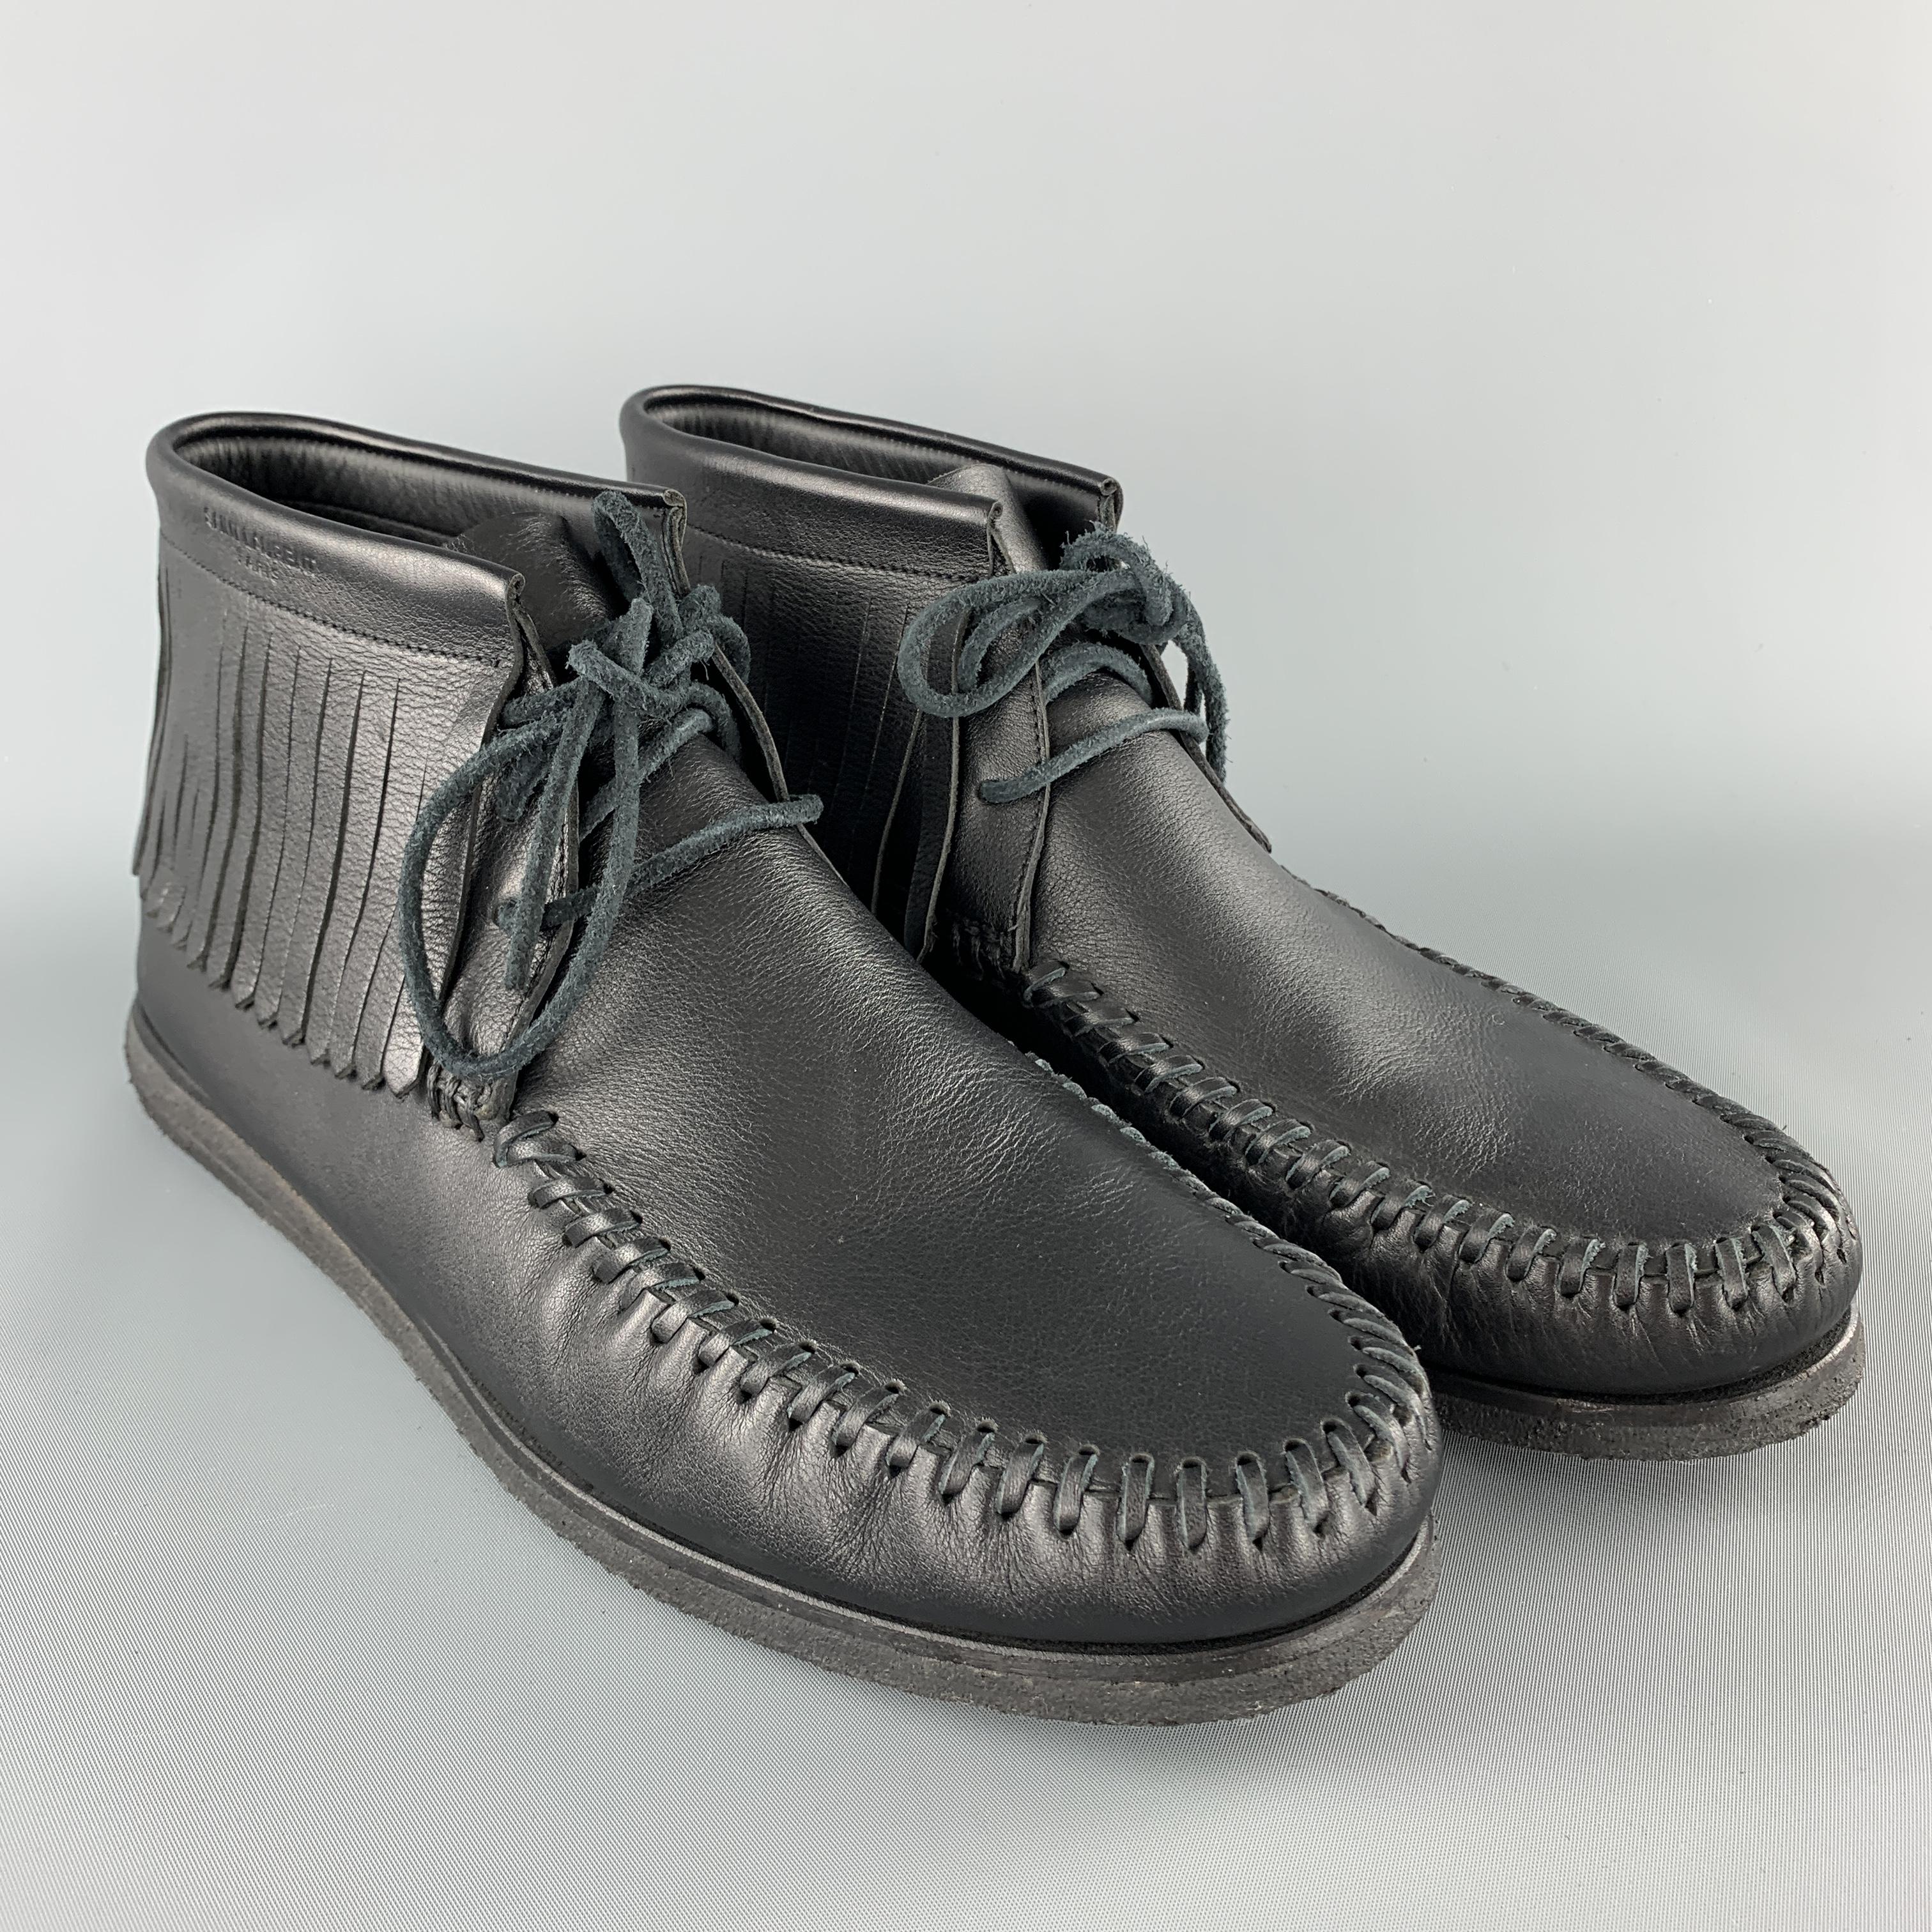 SAINT LAURENT Moccasin inspired sneakers come in smooth black leather with a whipstitch apron toe, suede laces, fringe trim, and crepe sole. With box. Made in Italy.

Excellent Pre-Owned Condition.
Marked: IT 45

Measurements:

Outsole: 11.75 x 4 in.